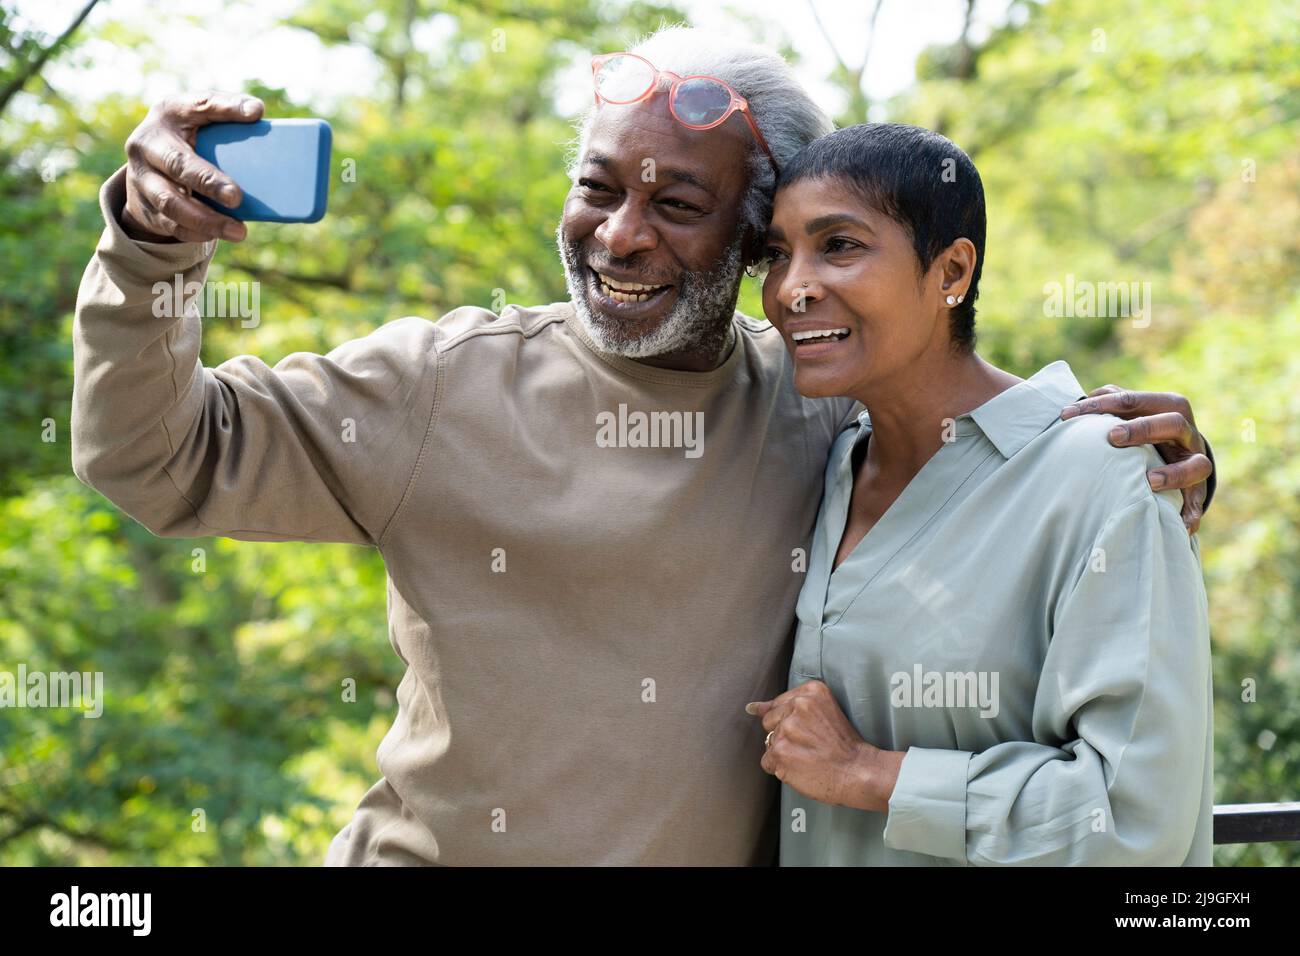 Smiling couple taking selfie with smart phone Stock Photo